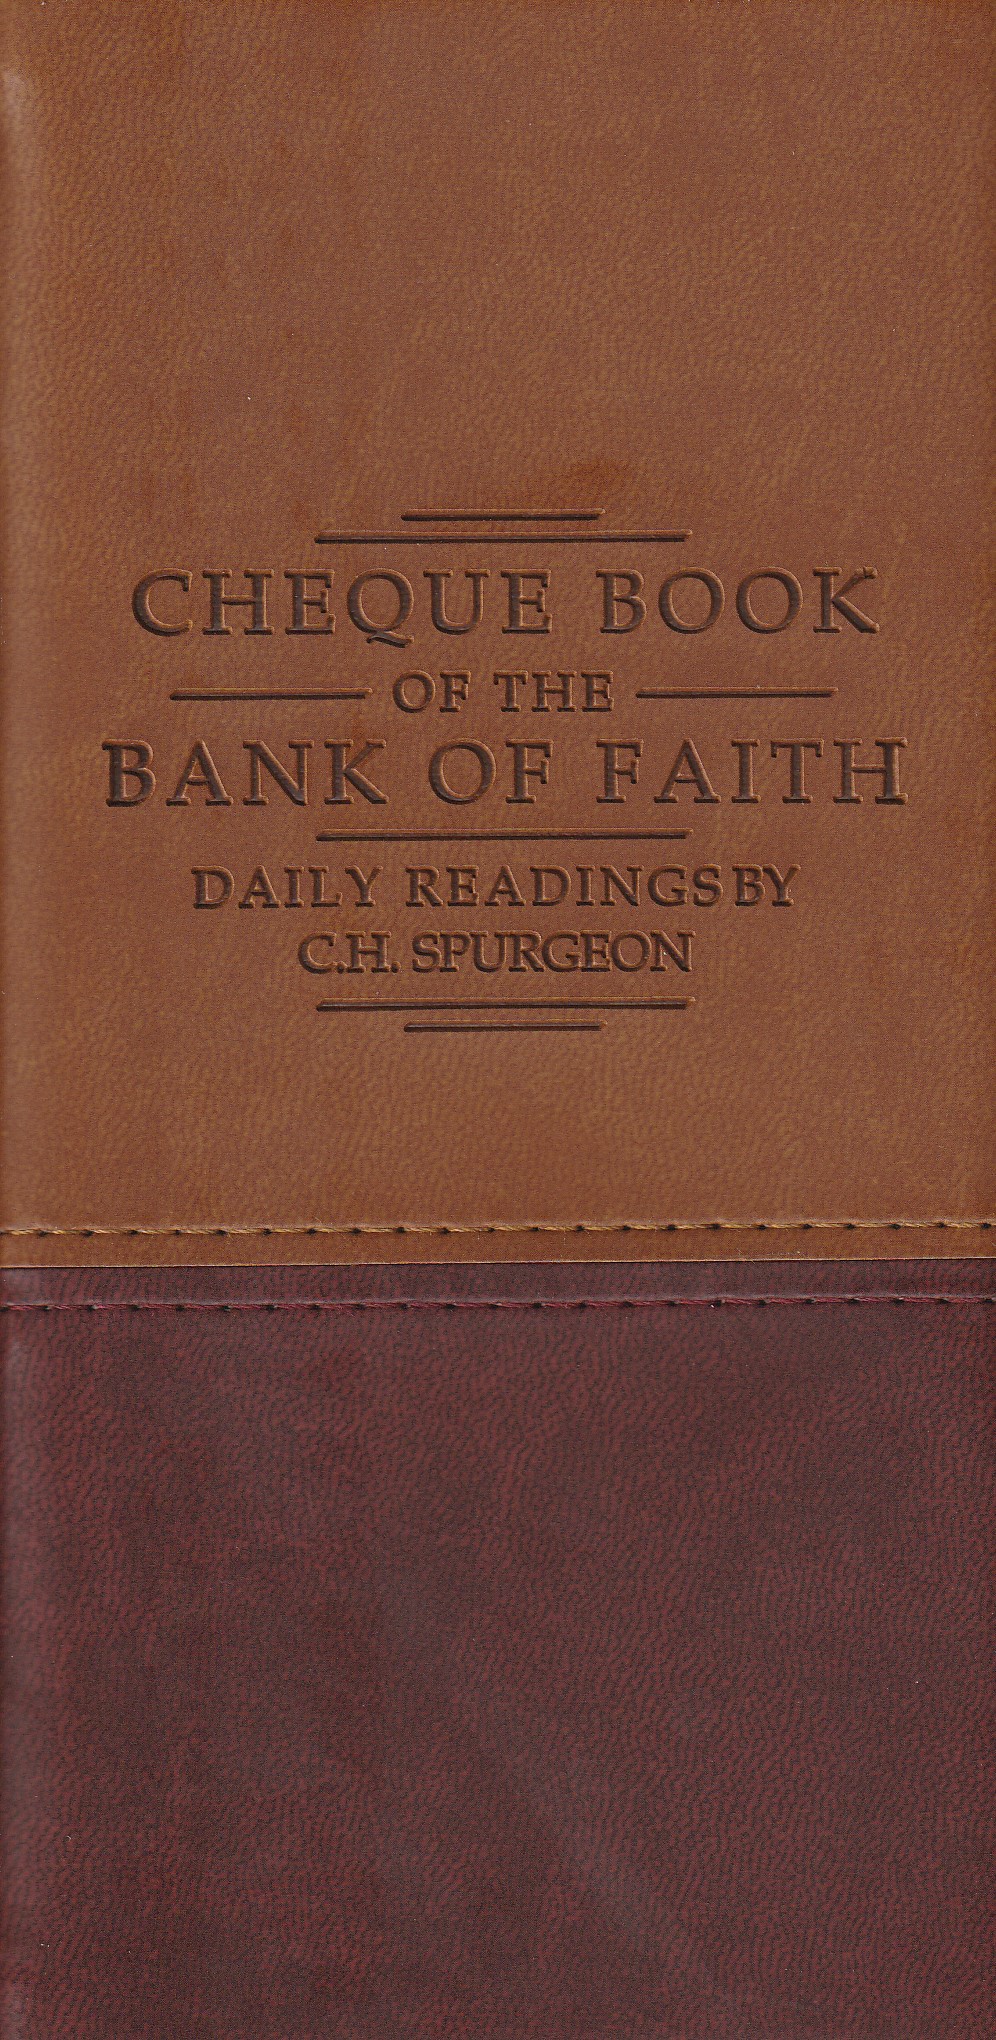 Cheque Book of the Bank of Faith (Gift) Tan/Burgundy